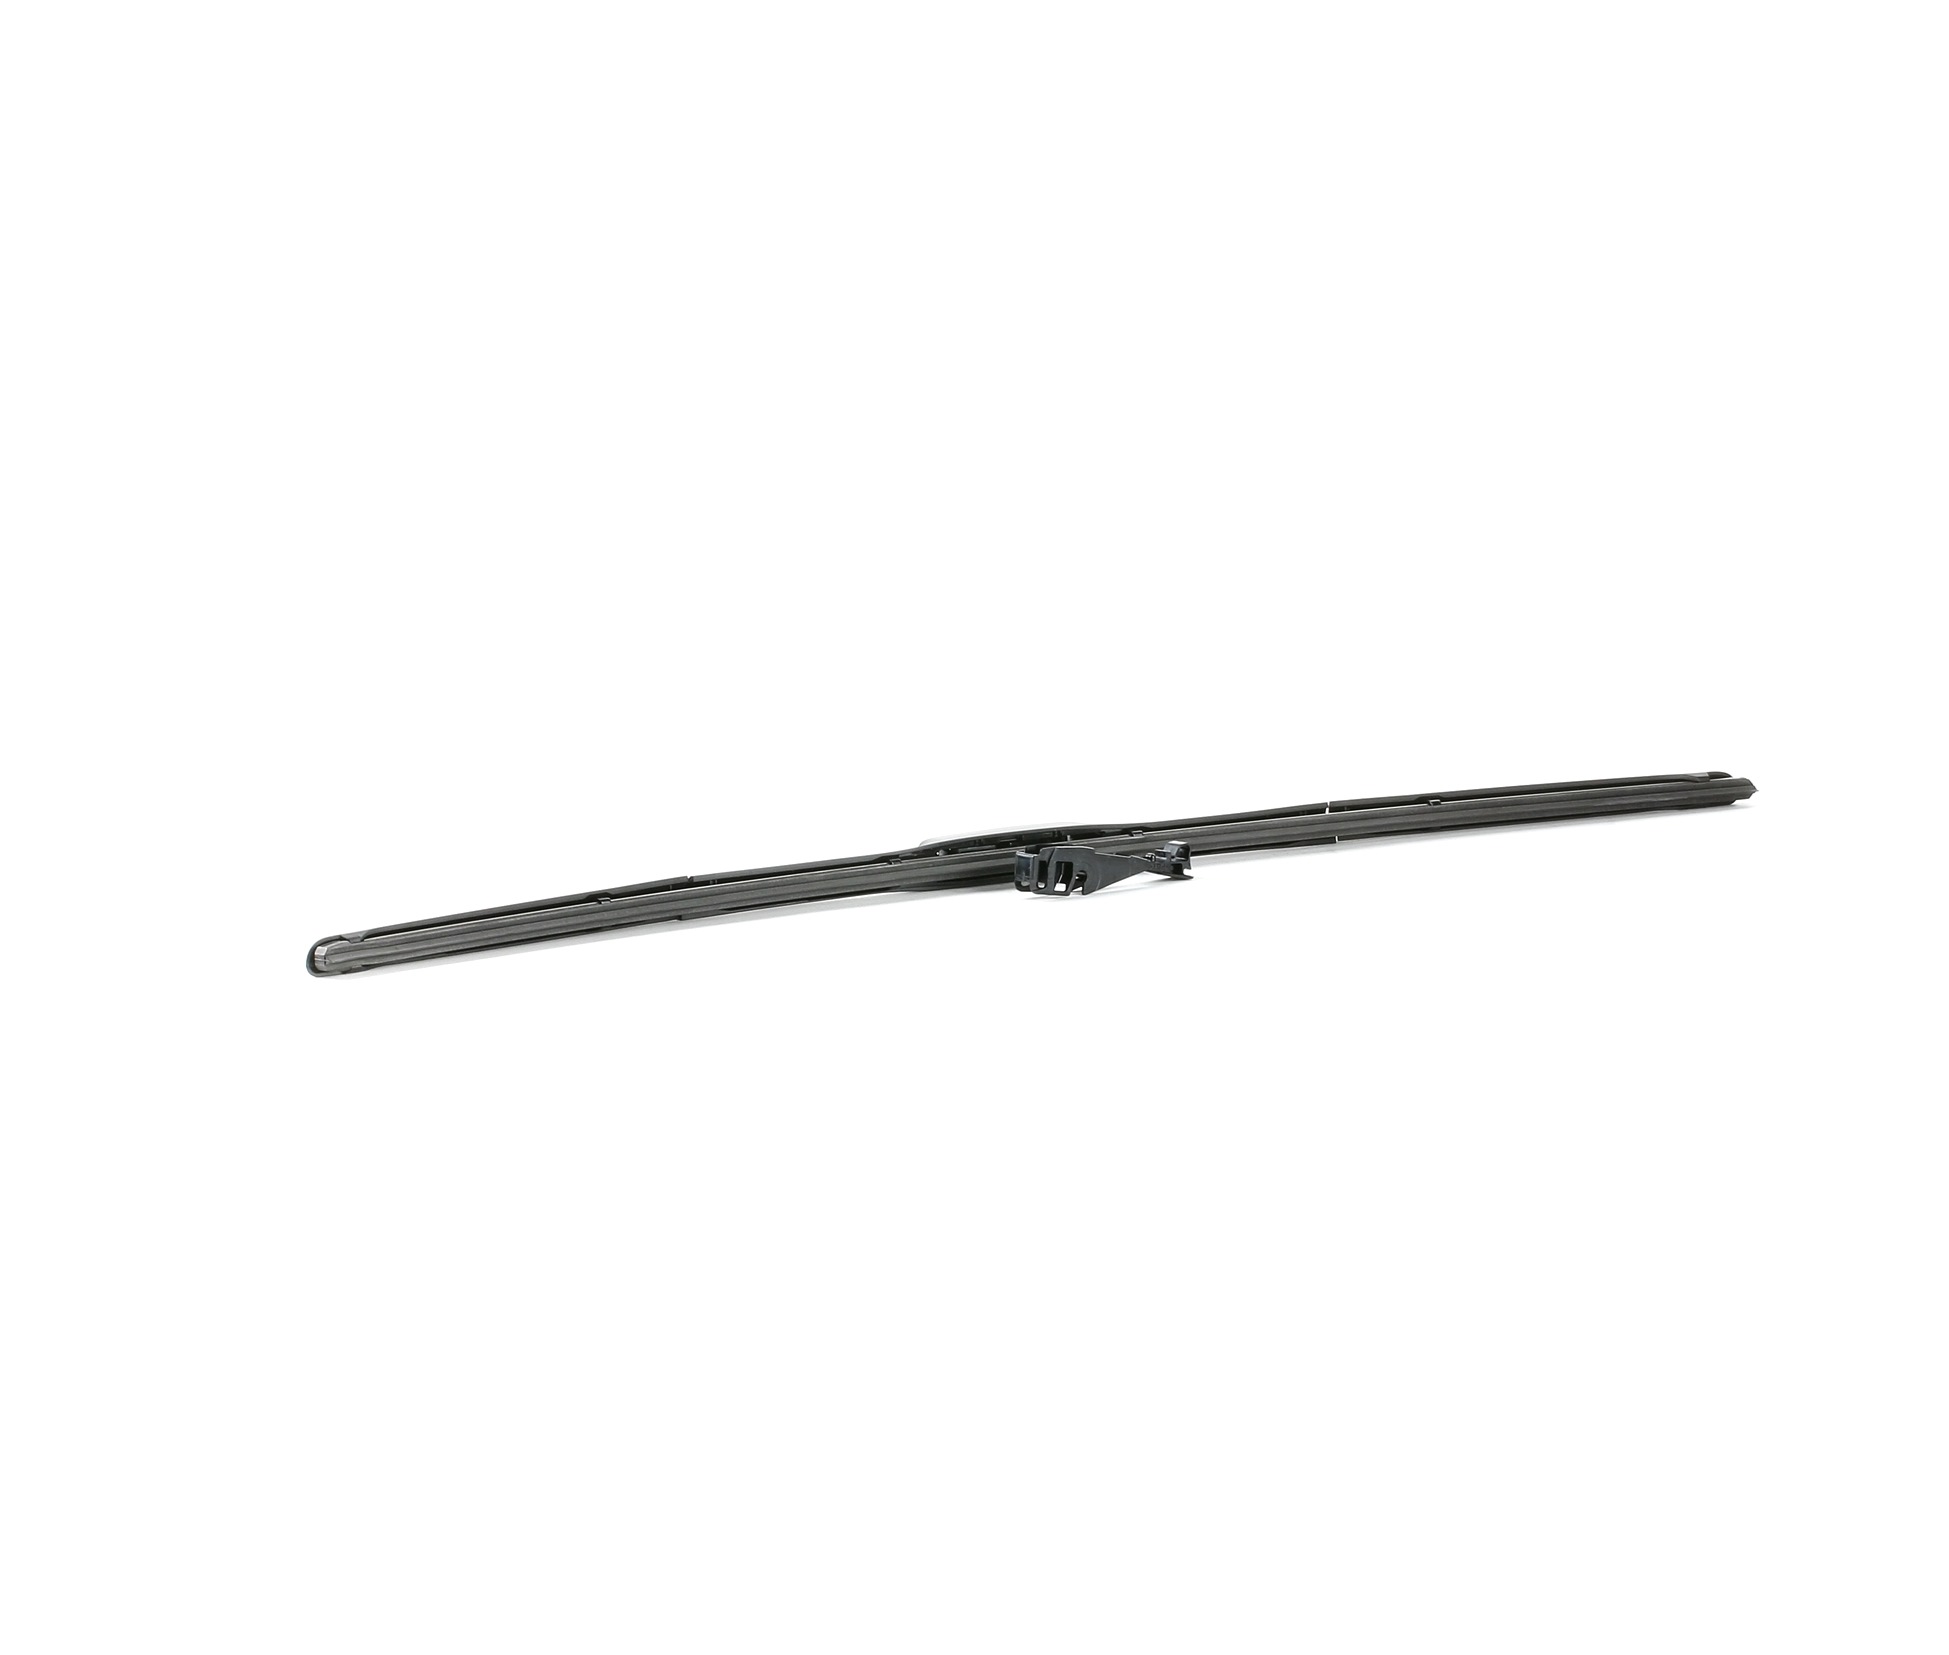 Buy Wiper Blade DENSO DUR-065R - Wipers system parts online